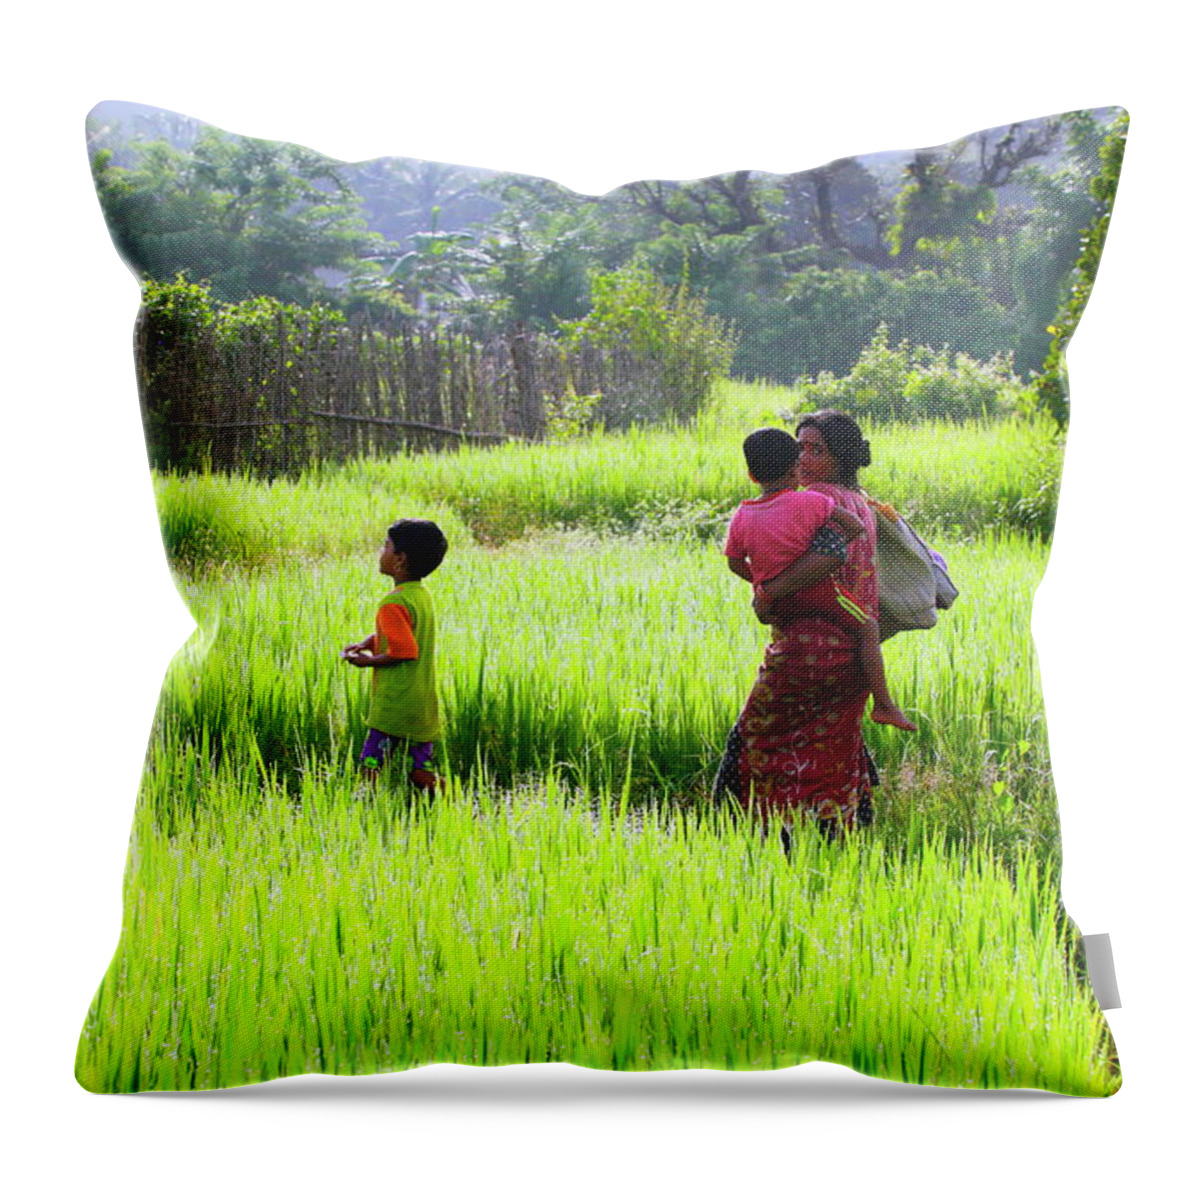 Three Quarter Length Throw Pillow featuring the photograph A Woman Walking In The Field by Rbb